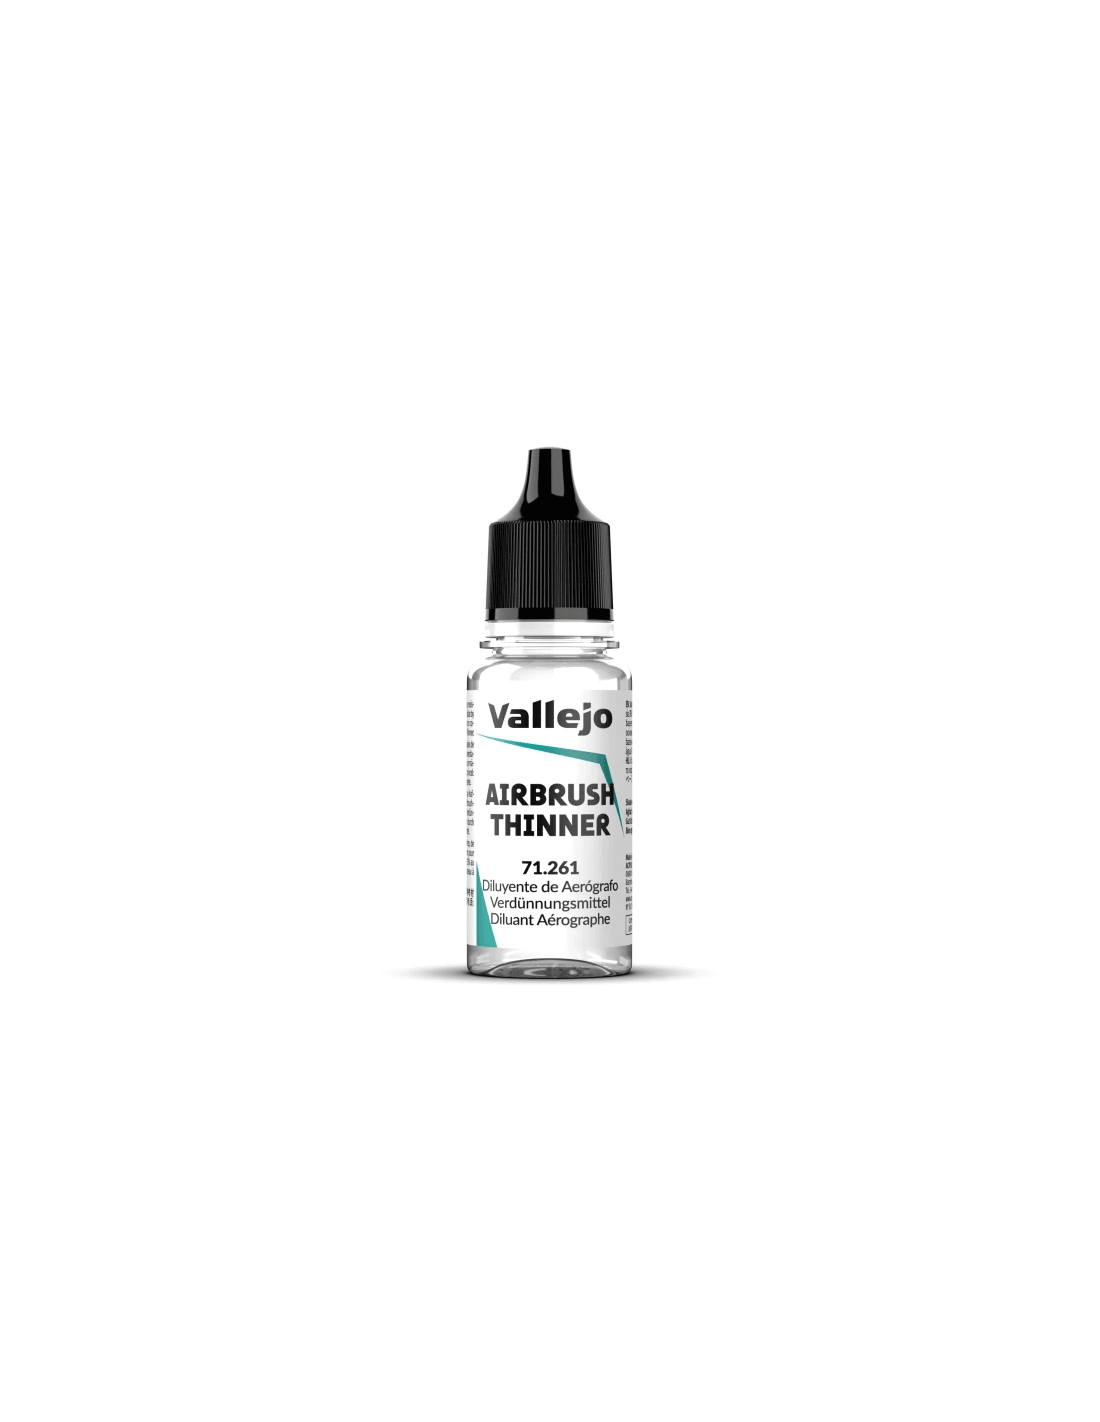 Airbrush Thinner - Auxiliary products - Game Air - Vallejo